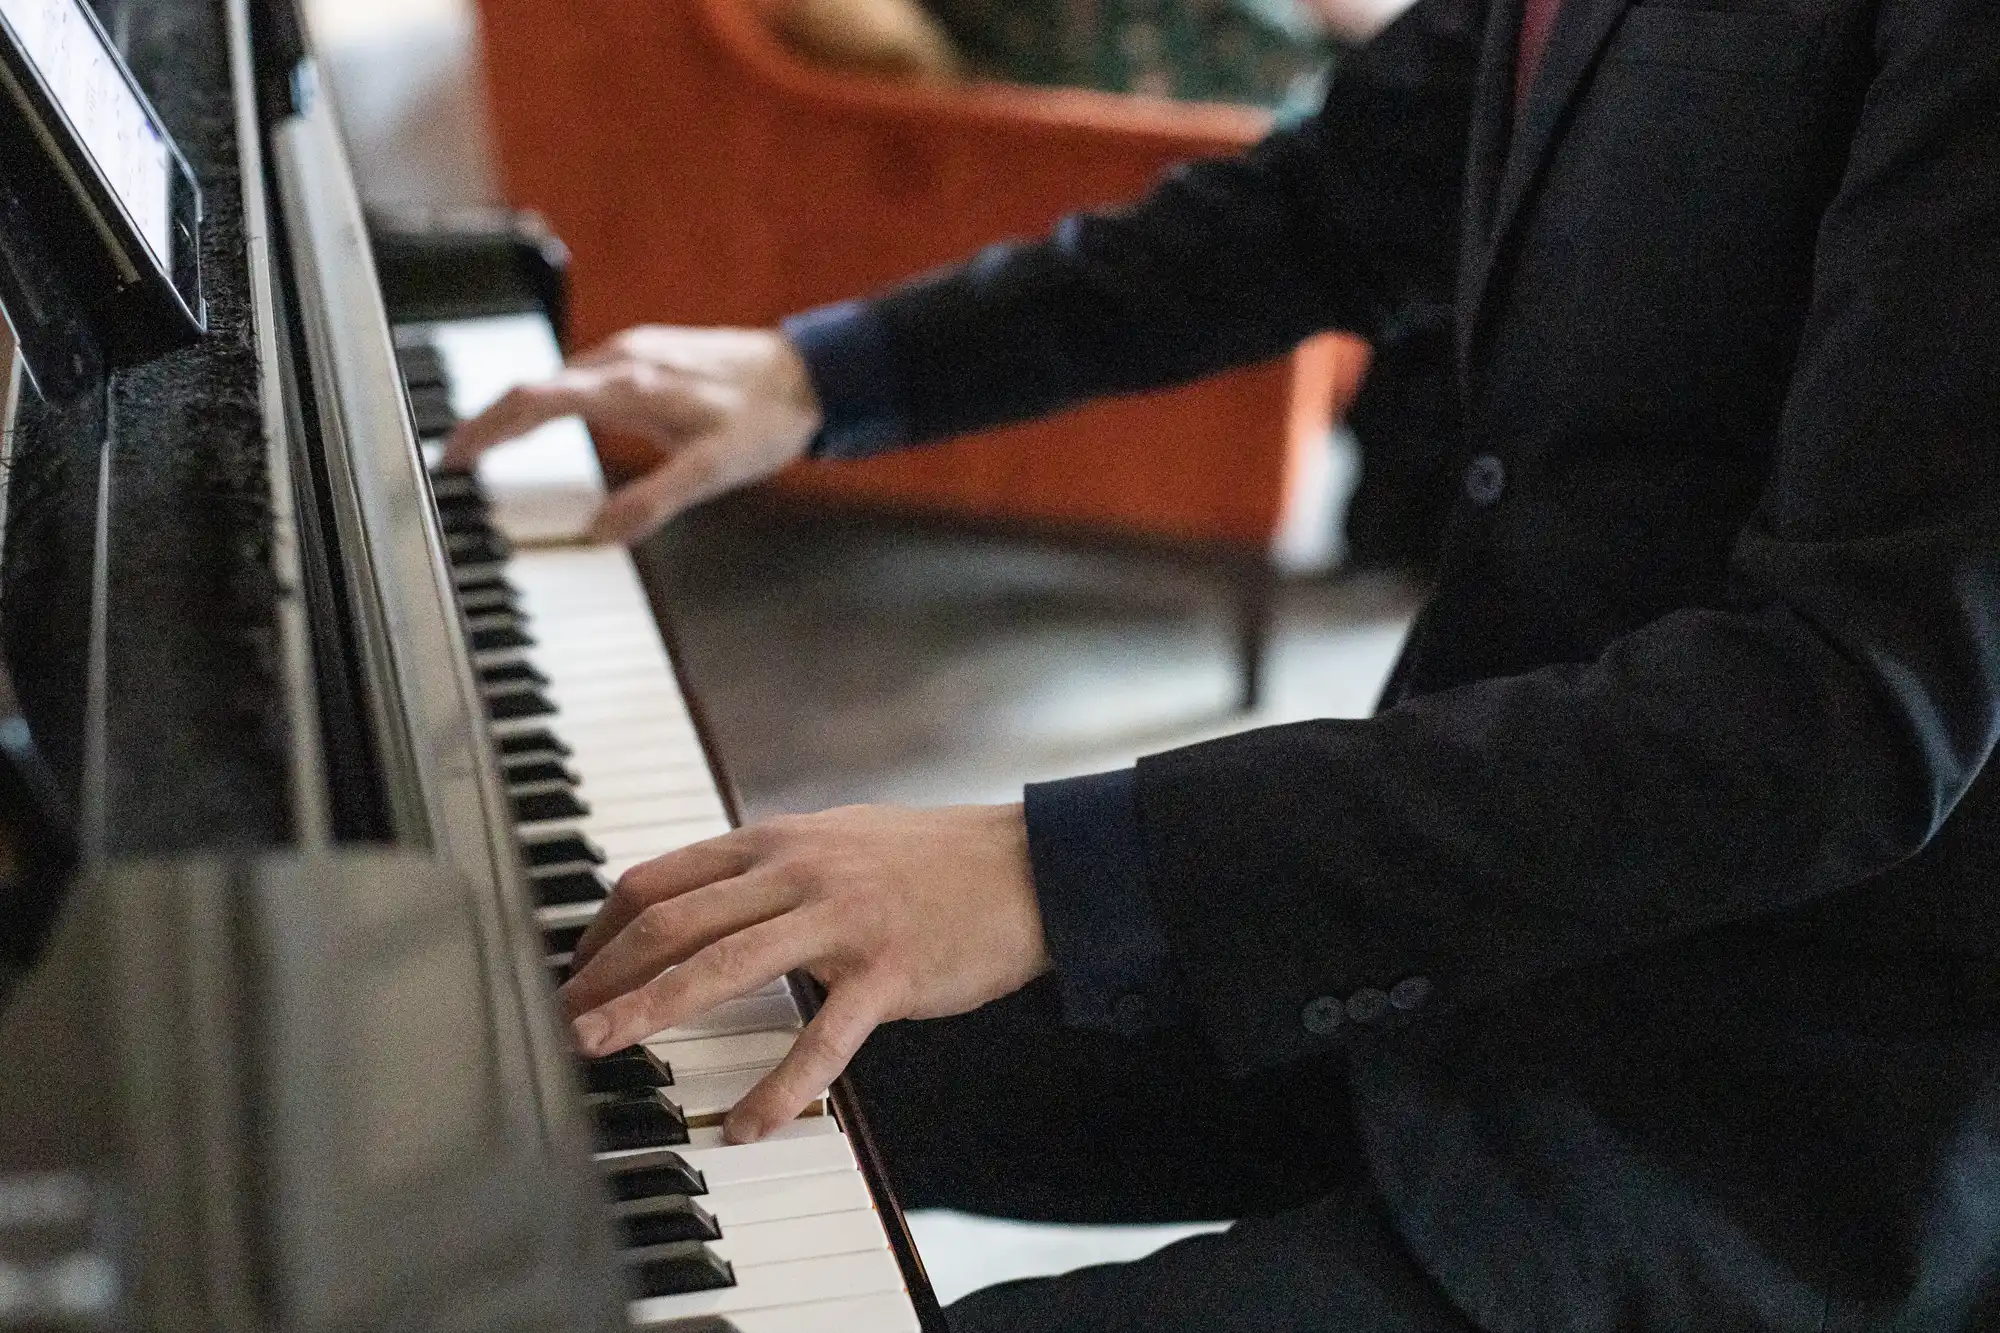 A person wearing a dark suit is playing a piano, with both hands positioned on the keys. An orange couch is visible in the background.